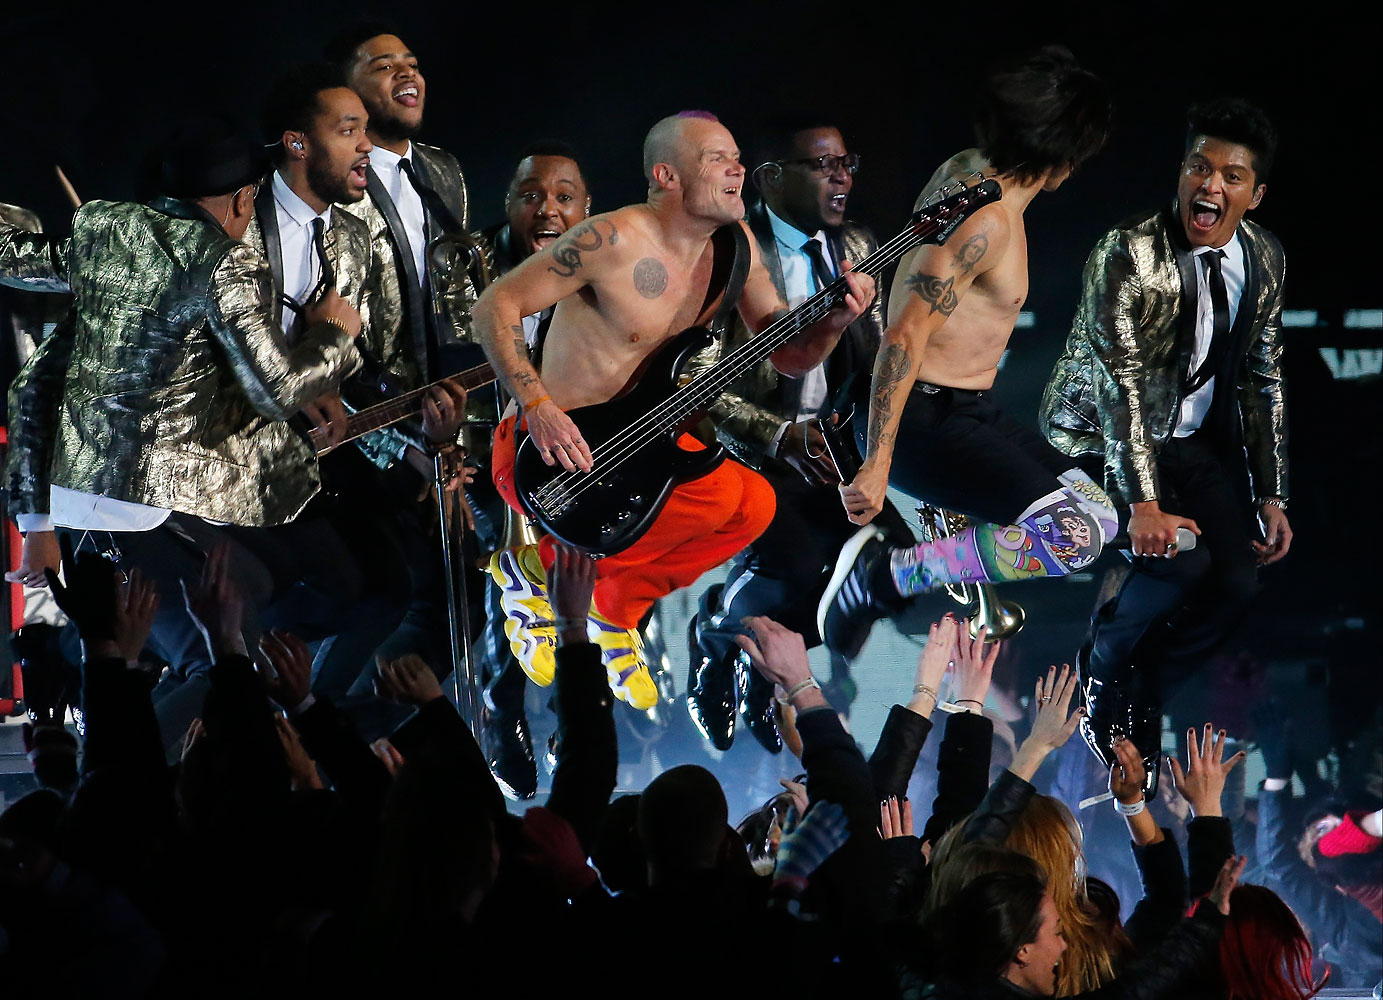 The Red Hot Chili Peppers and Bruno Mars perform during the halftime show of the NFL Super Bowl XLVIII football game between the Seattle Seahawks and the Denver Broncos Sunday, Feb. 2, 2014, in East Rutherford, N.J.